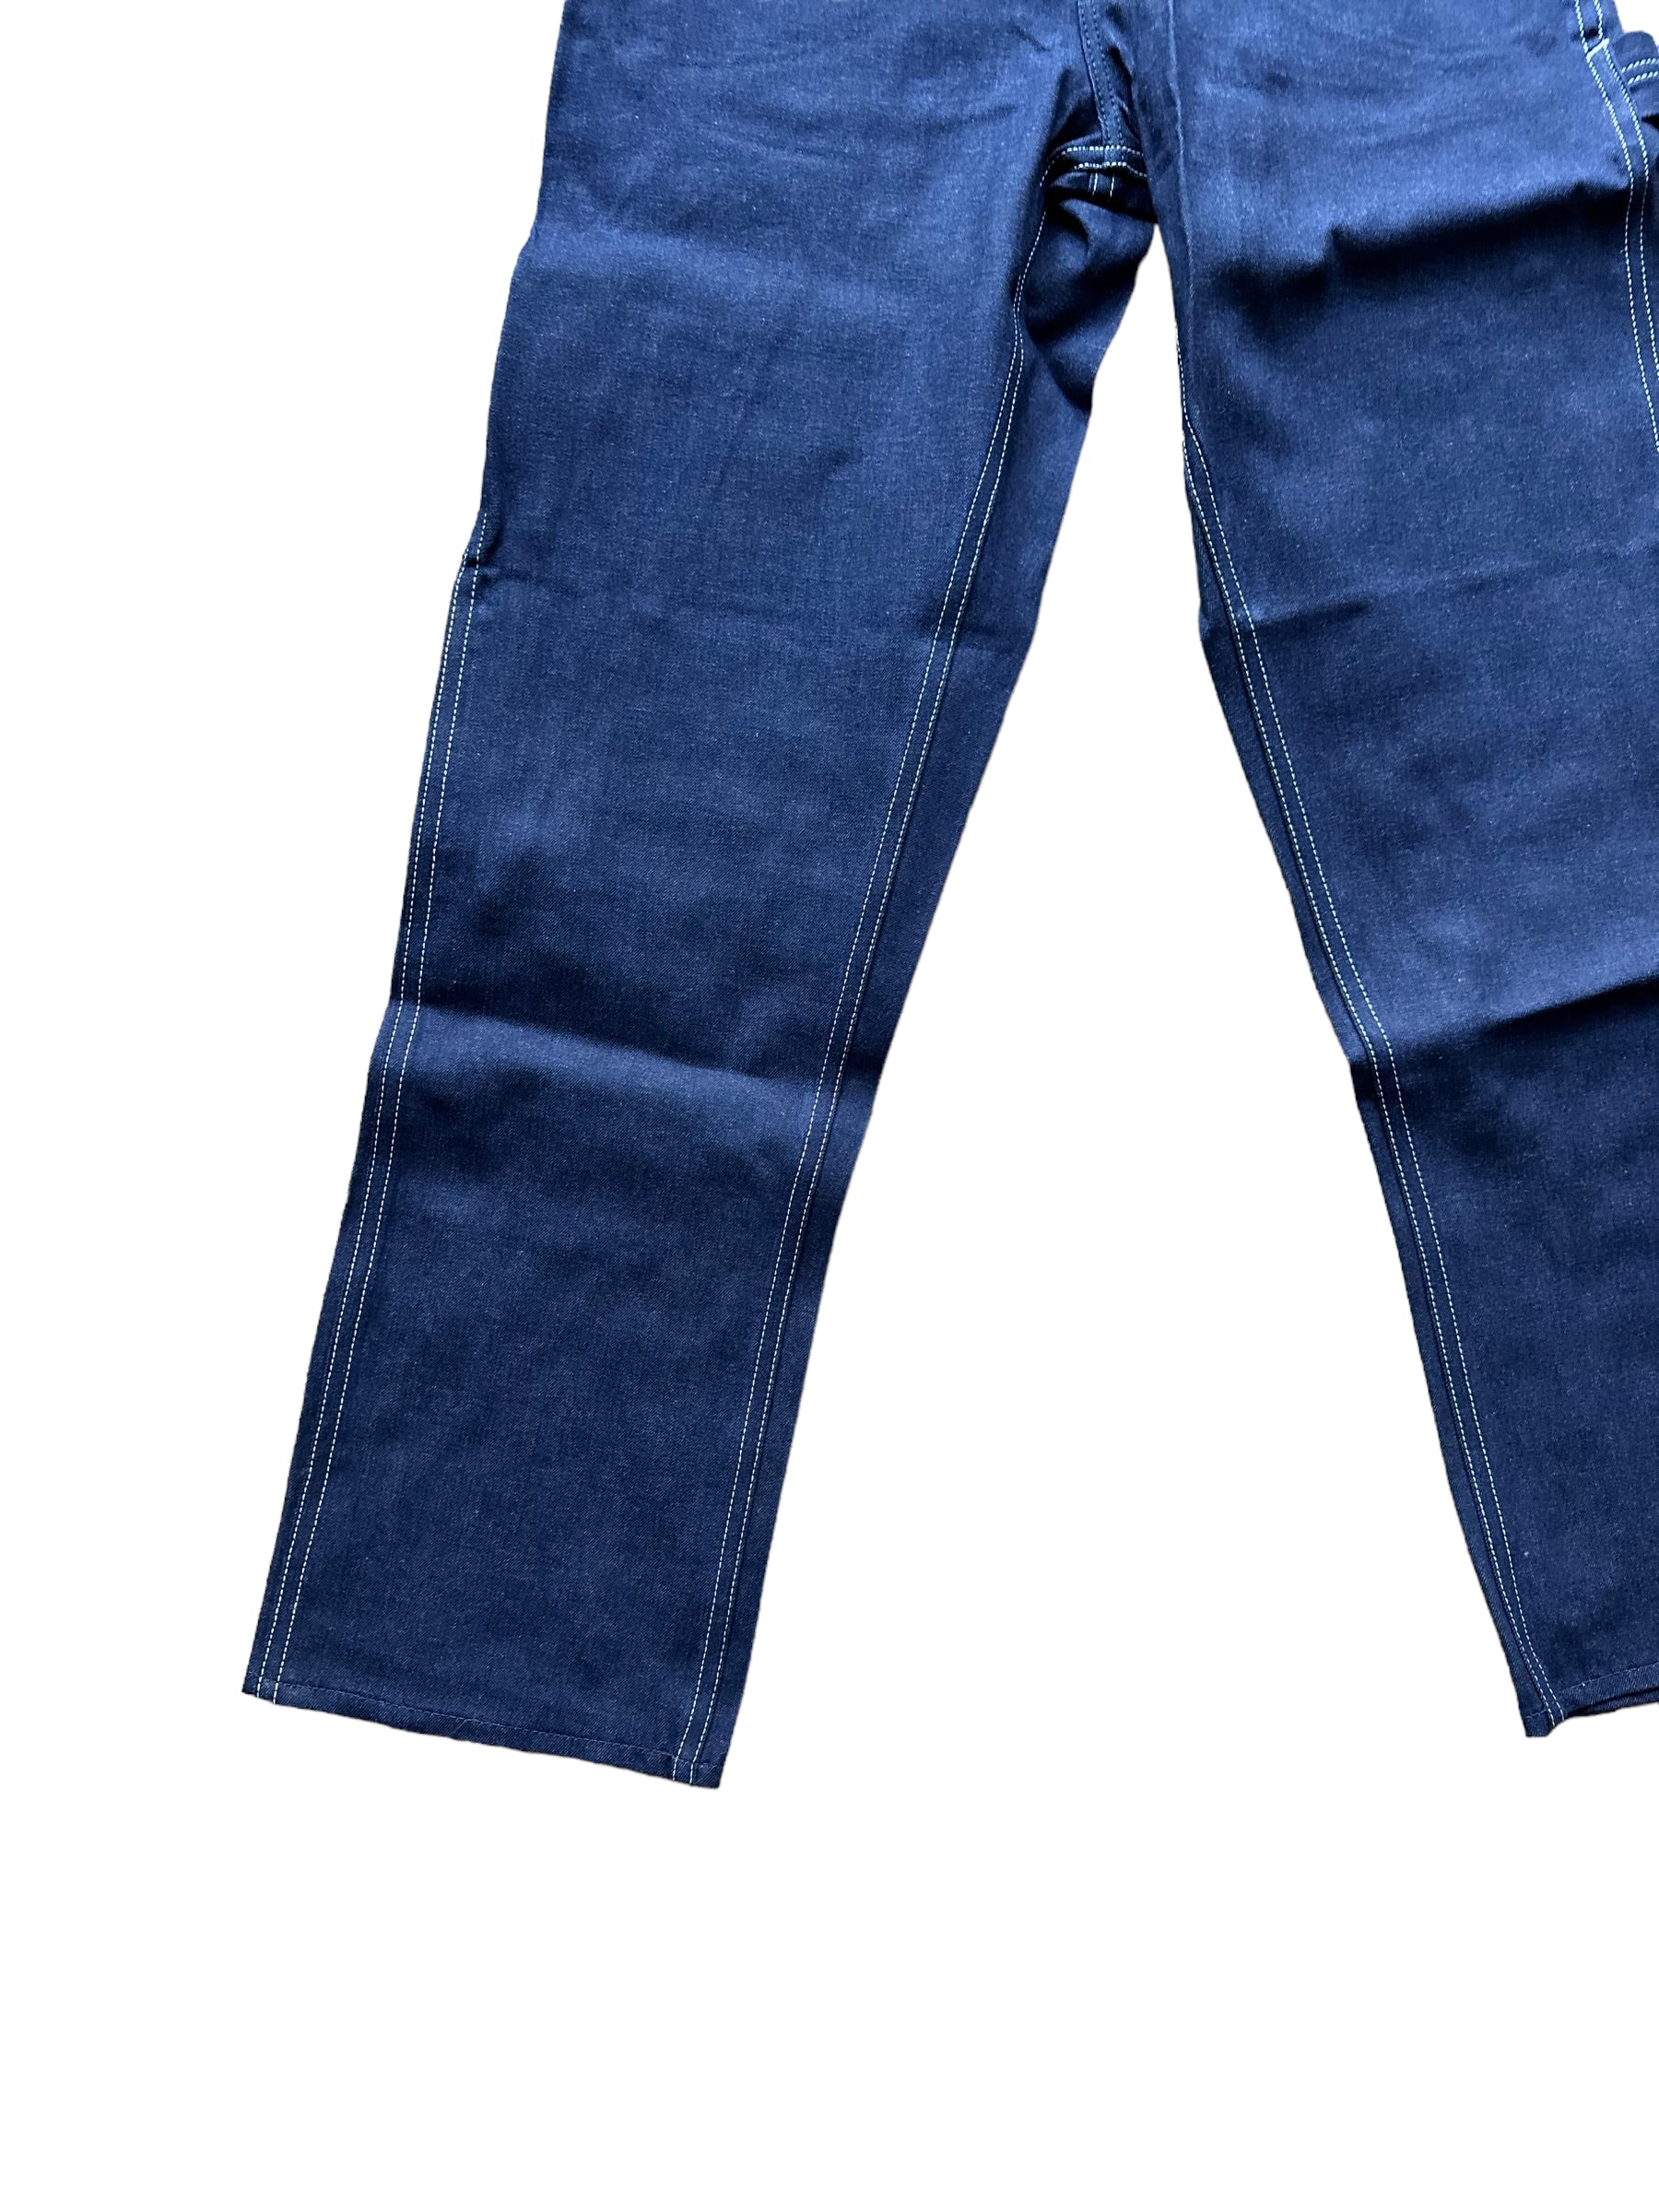 Lower Front Right Leg View of New Old Stock Vintage Carter's Carpenter Dungarees W29 L30 | Vintage Denim Workwear Seattle 